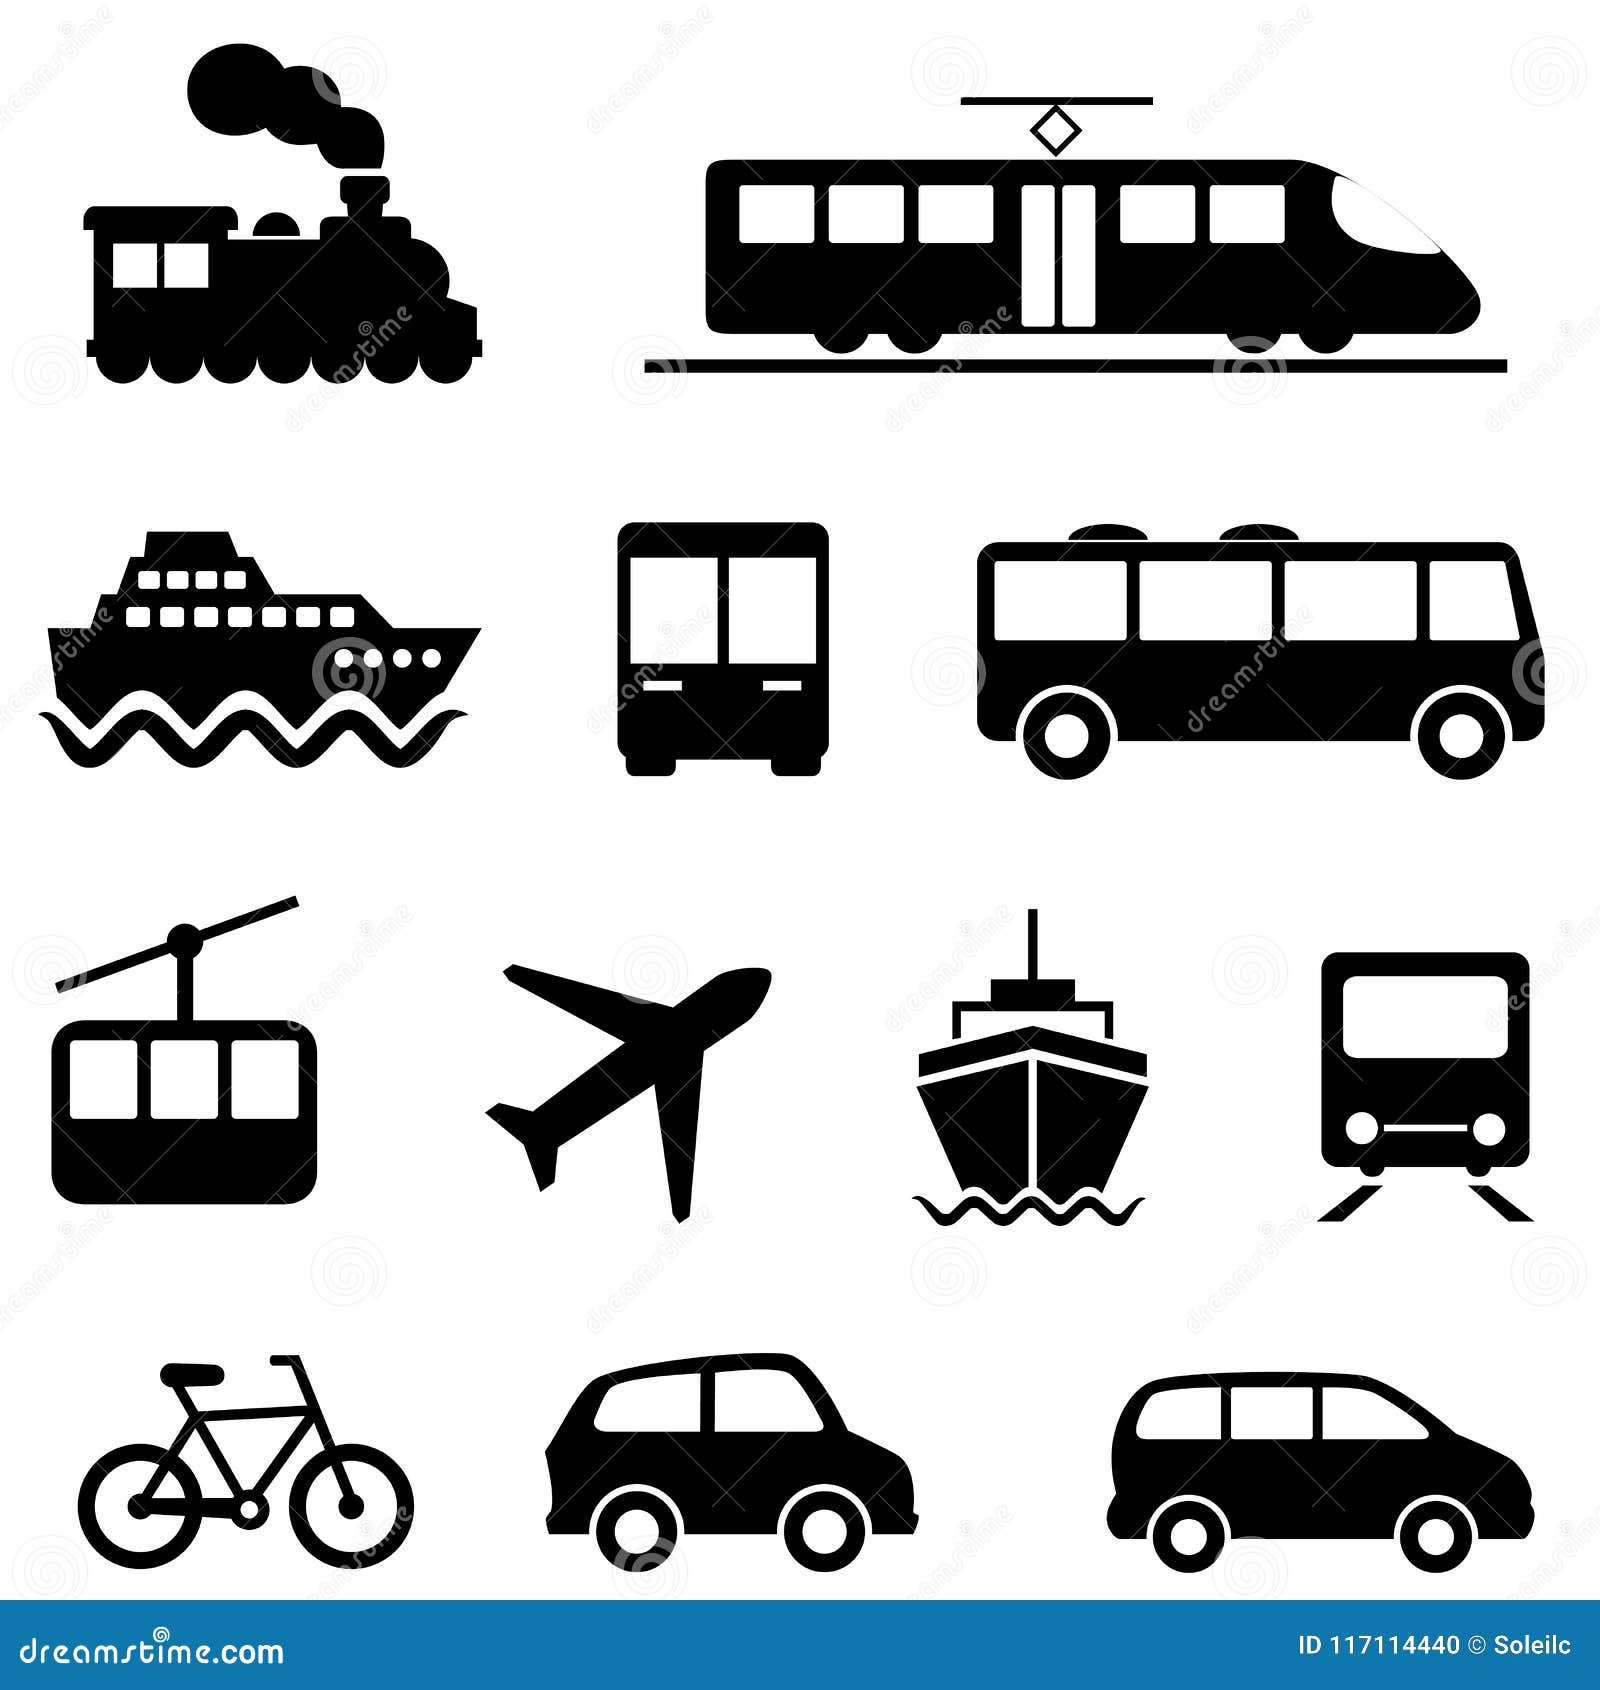 Air Sea Land And Public Transportation Icons Stock Vector Illustration Of Auto Vector 117114440